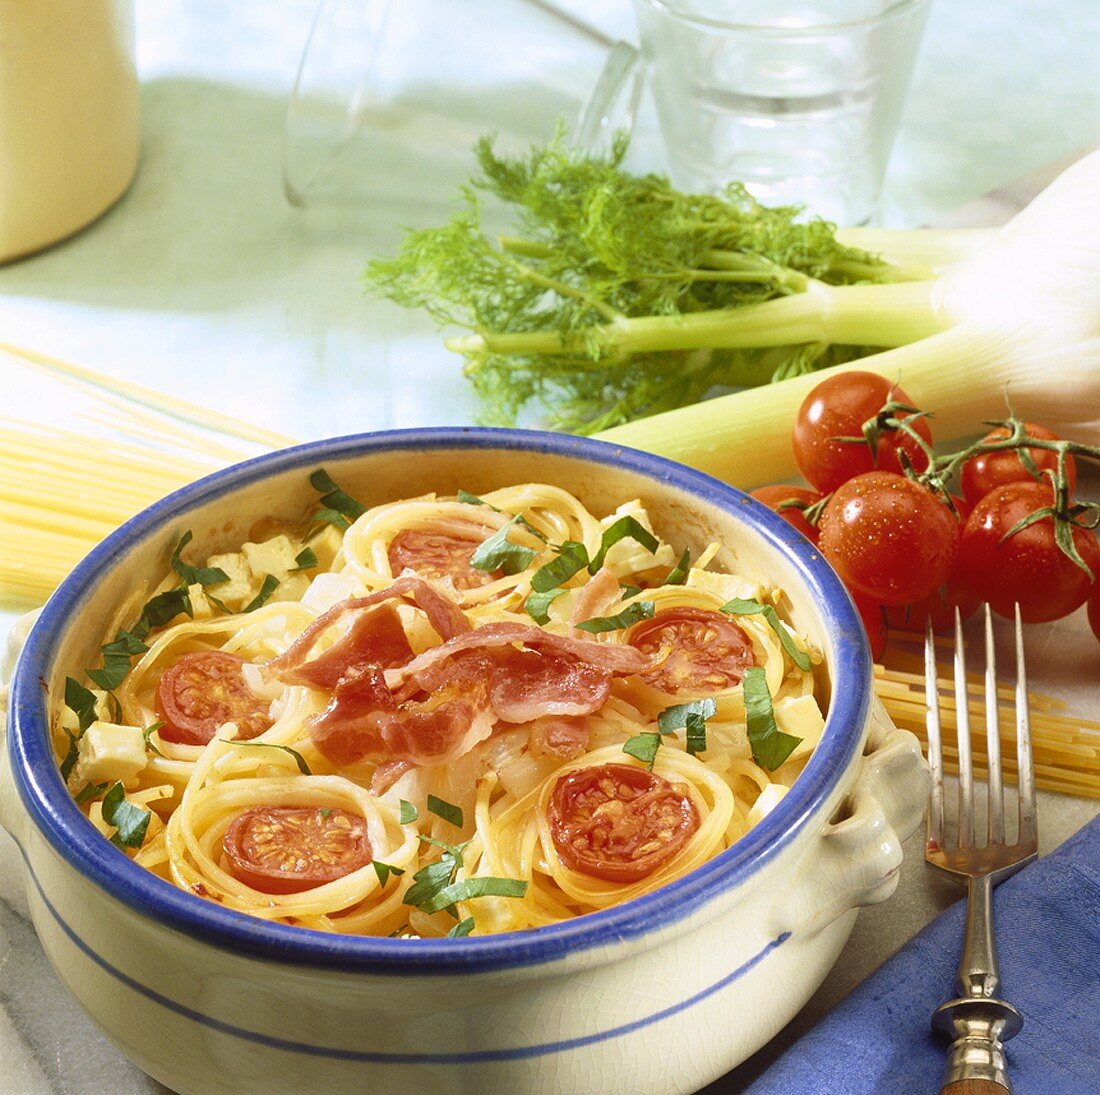 Pasta and fennel bake with tomatoes and bacon